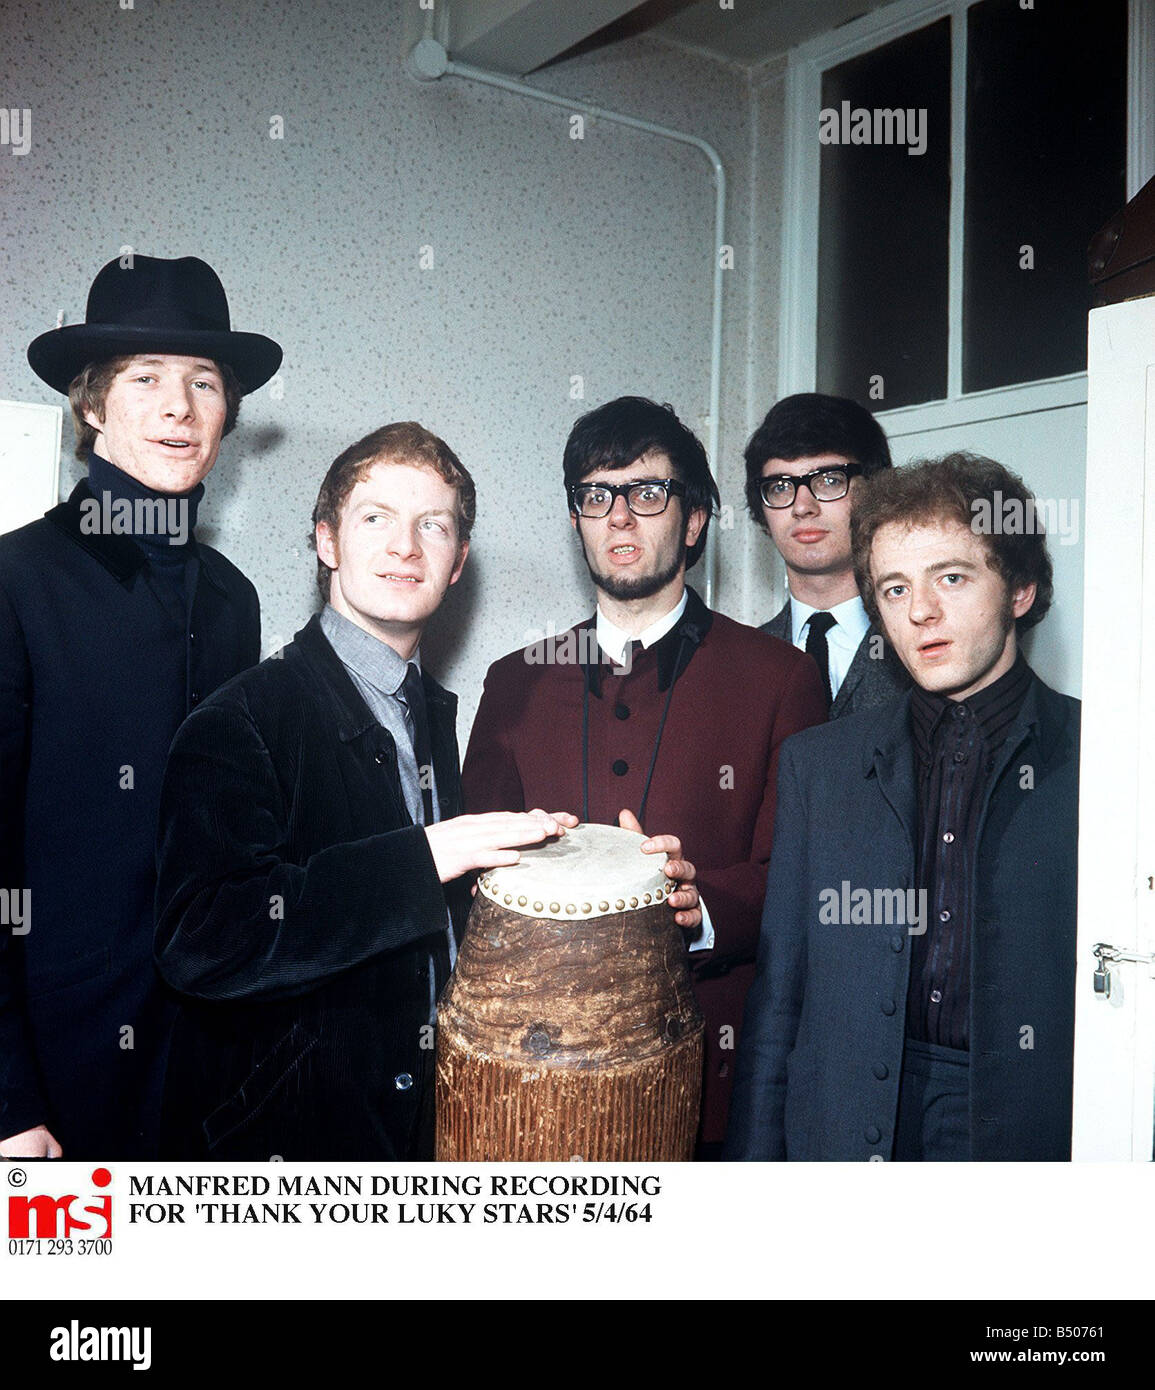 Pop group Manfred Mann during recording of Thank 1964 your lucky stars show Stock Photo